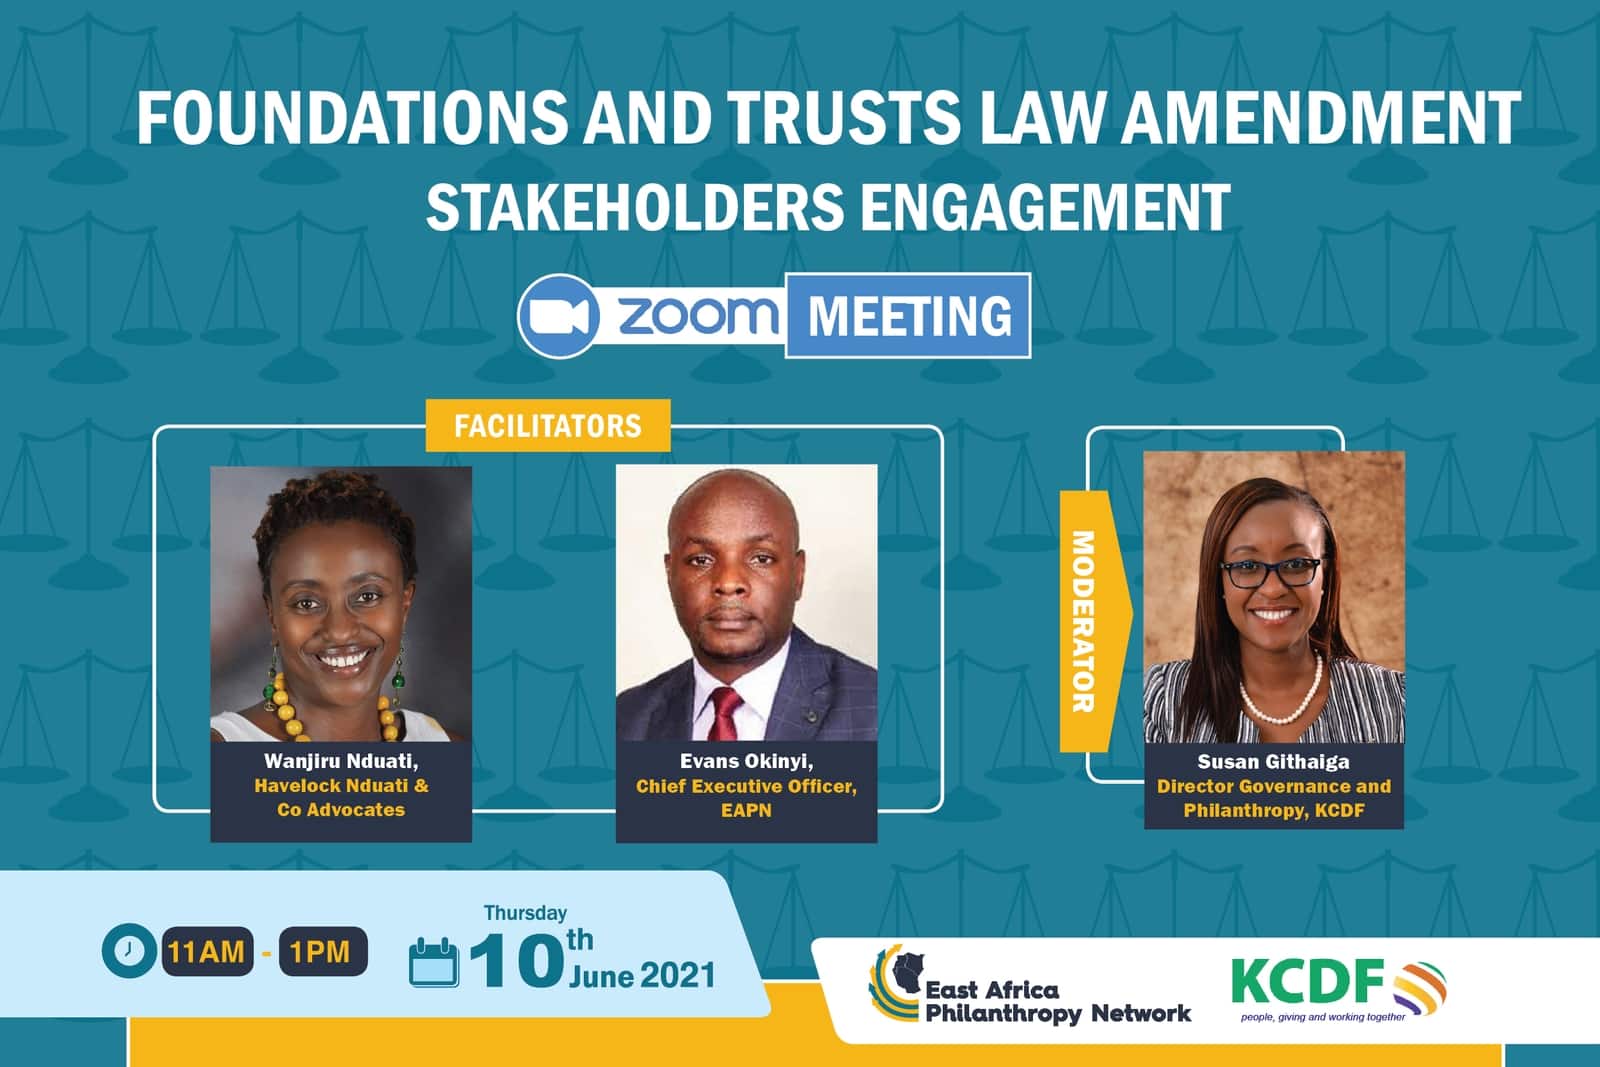 Foundations and Trusts Law Amendment Stakeholders Engagement